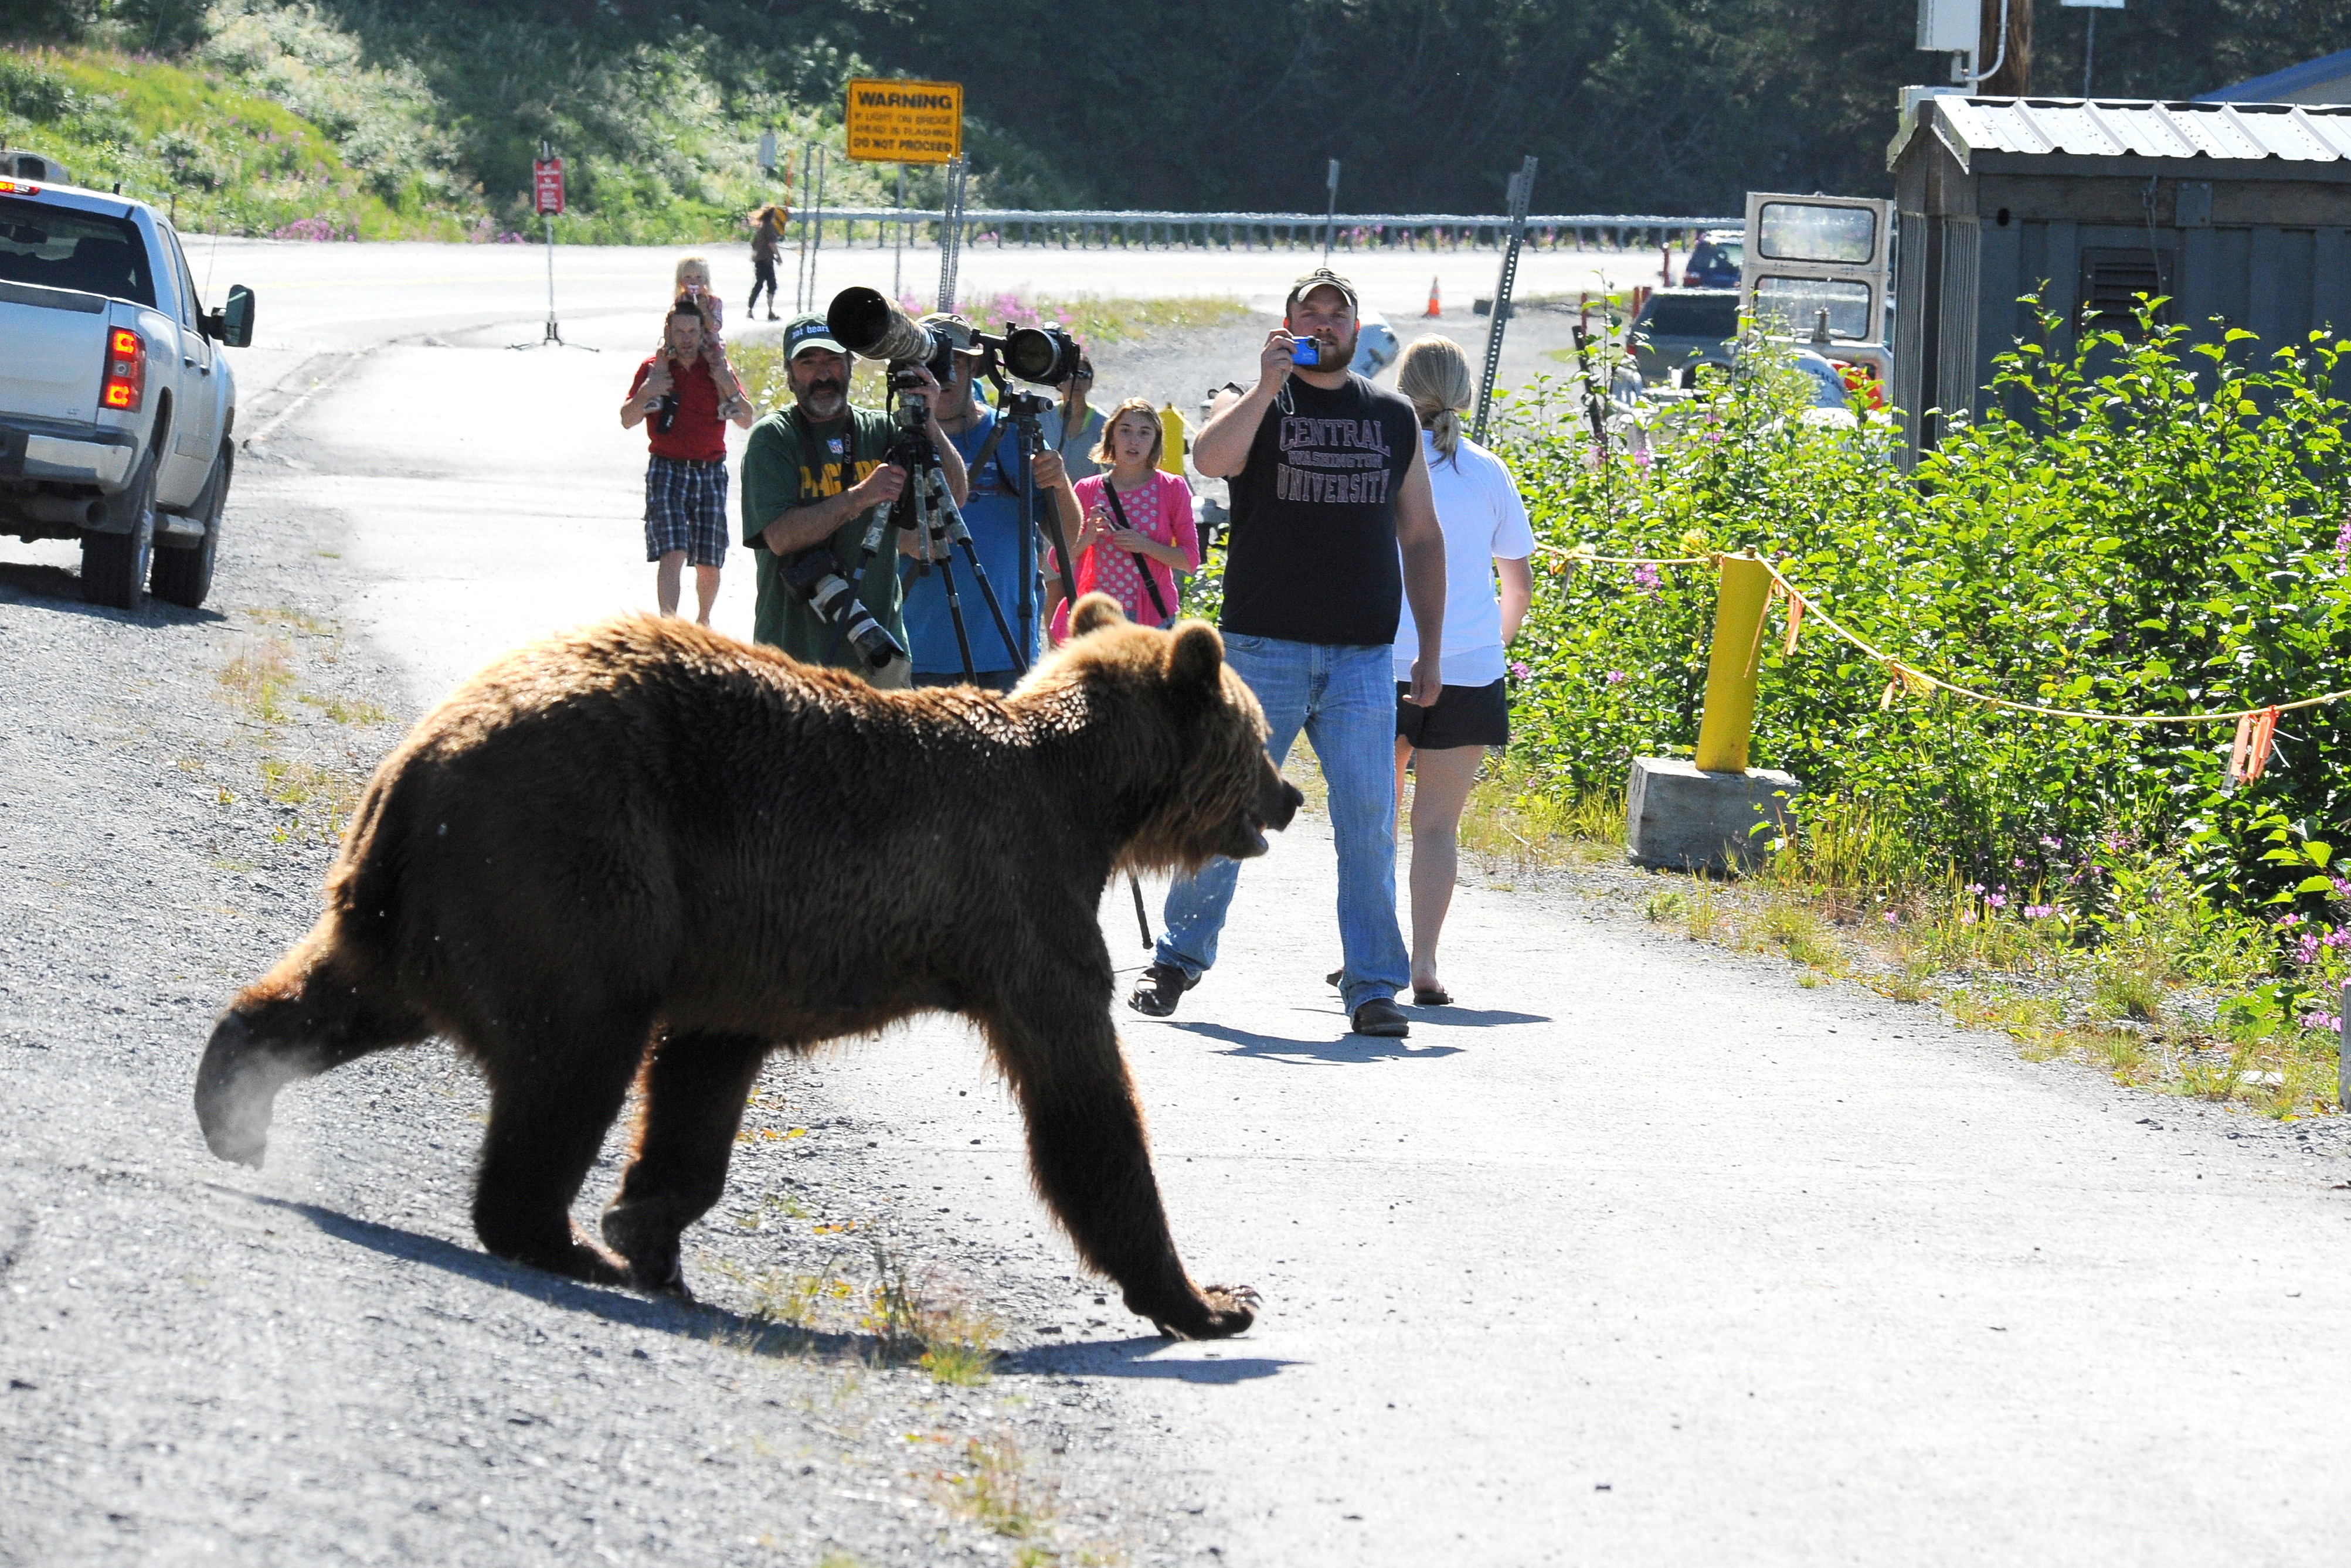 humans stand too close to a brown bear